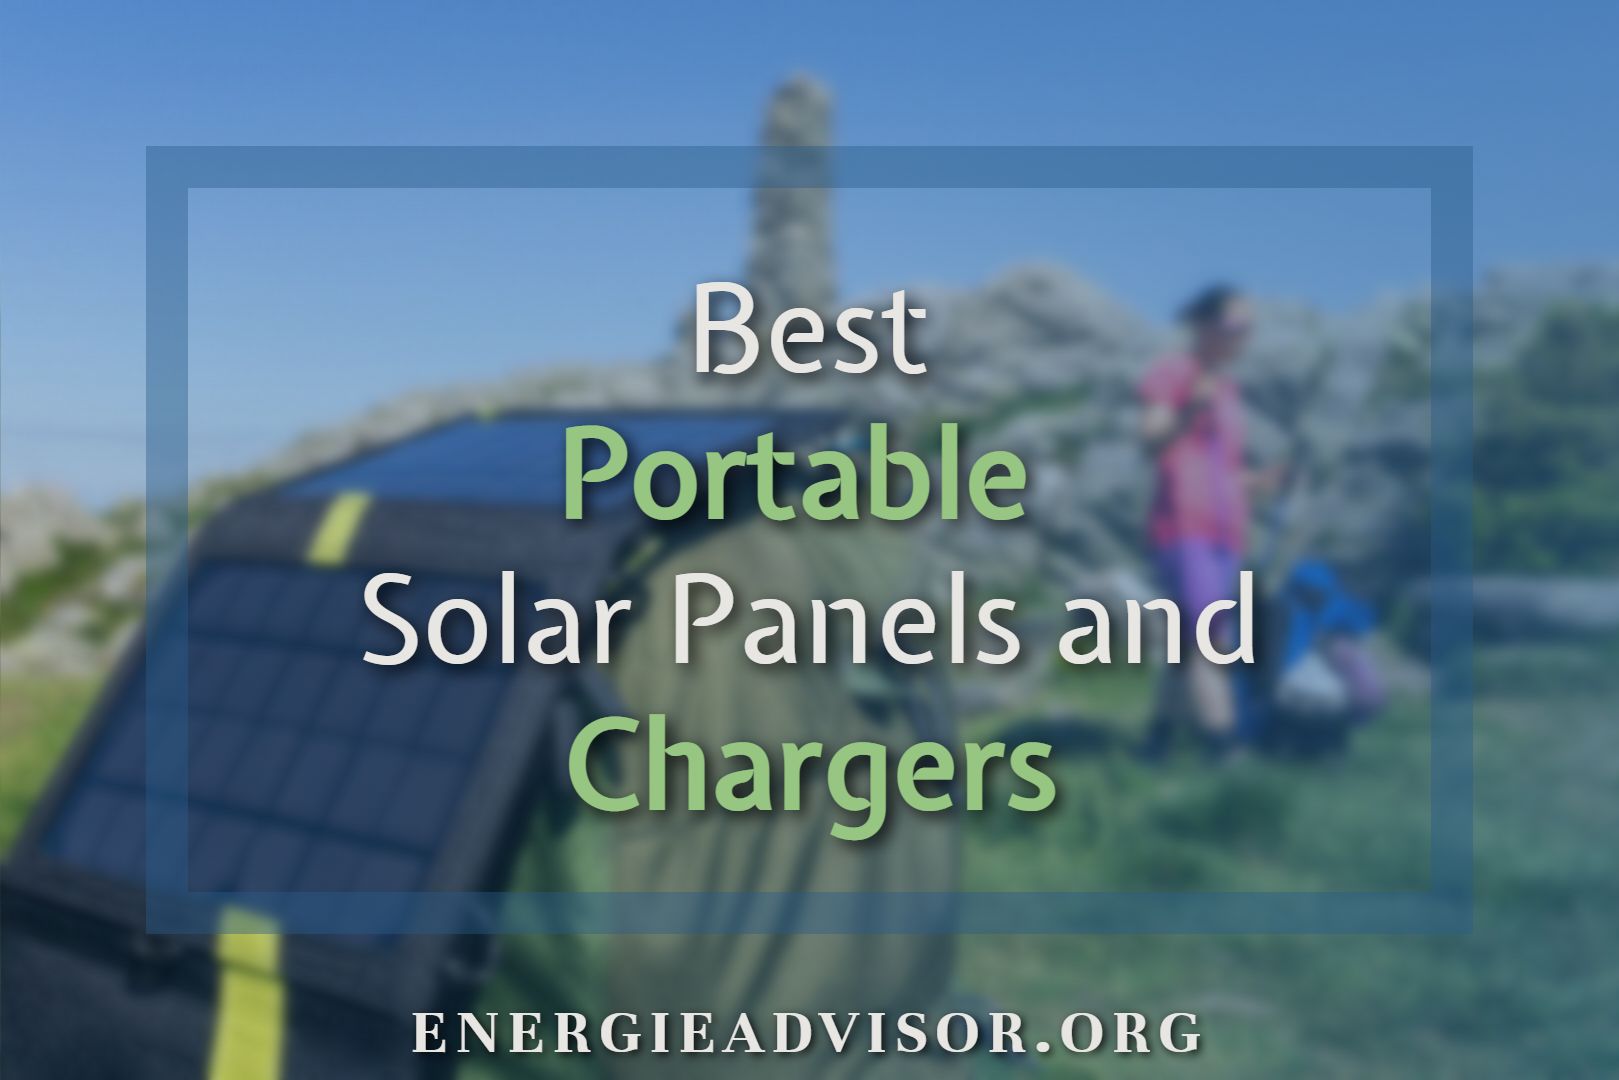 Best Portable Solar Panels and Chargers